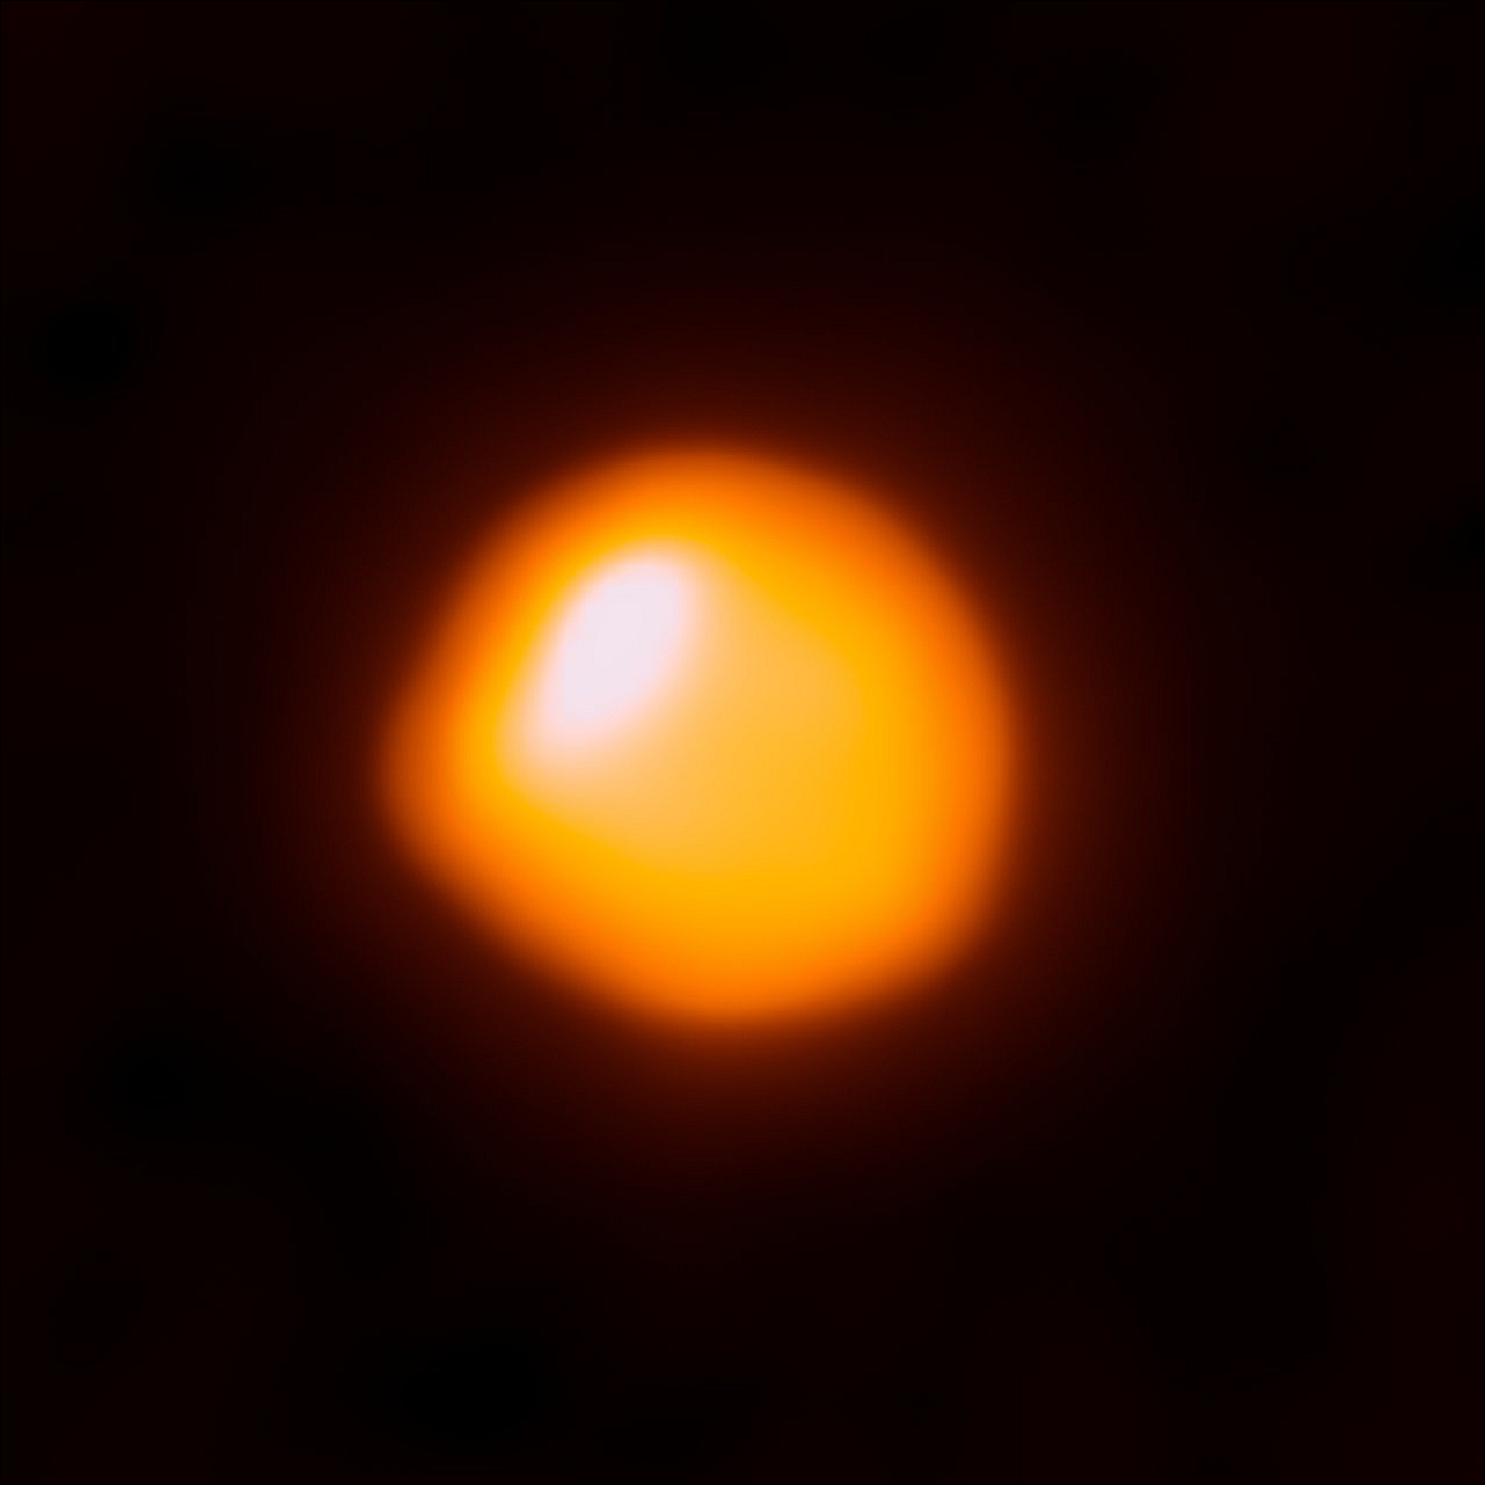 Figure 31: This orange blob shows the nearby star Betelgeuse, as seen by ALMA. This is the first time that ALMA has ever observed the surface of a star and this first attempt has resulted in the highest-resolution image of Betelgeuse available (image credit: ALMA (ESO/NAOJ/NRAO)/E. O'Gorman/P. Kervella)